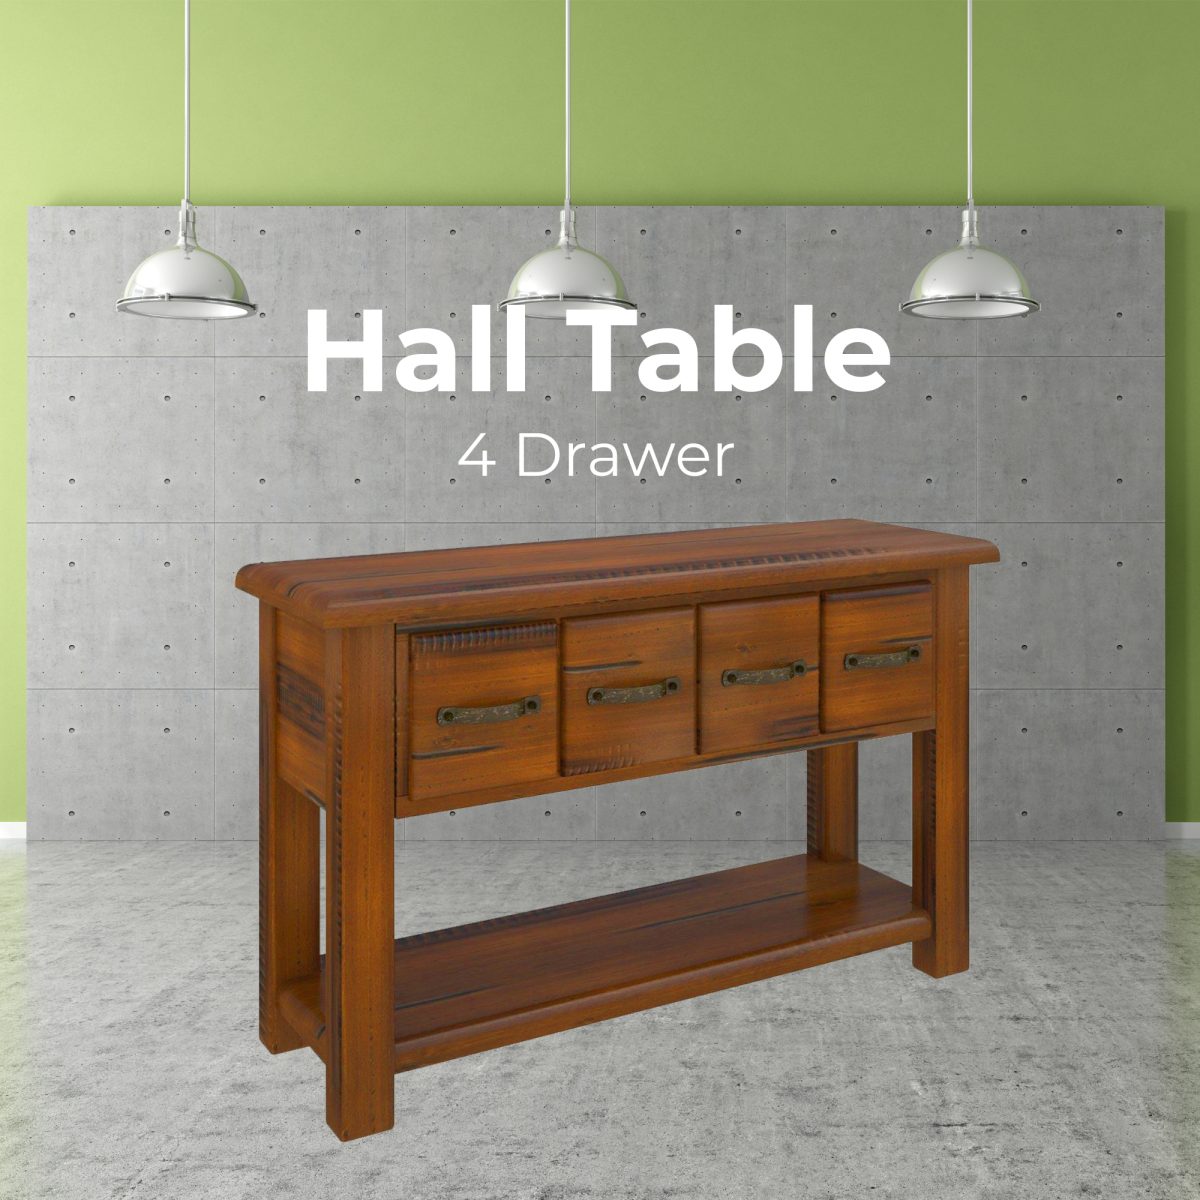 Umber Console Hallway Entry Table 136cm Solid Pine Timber Wood – Dark Brown